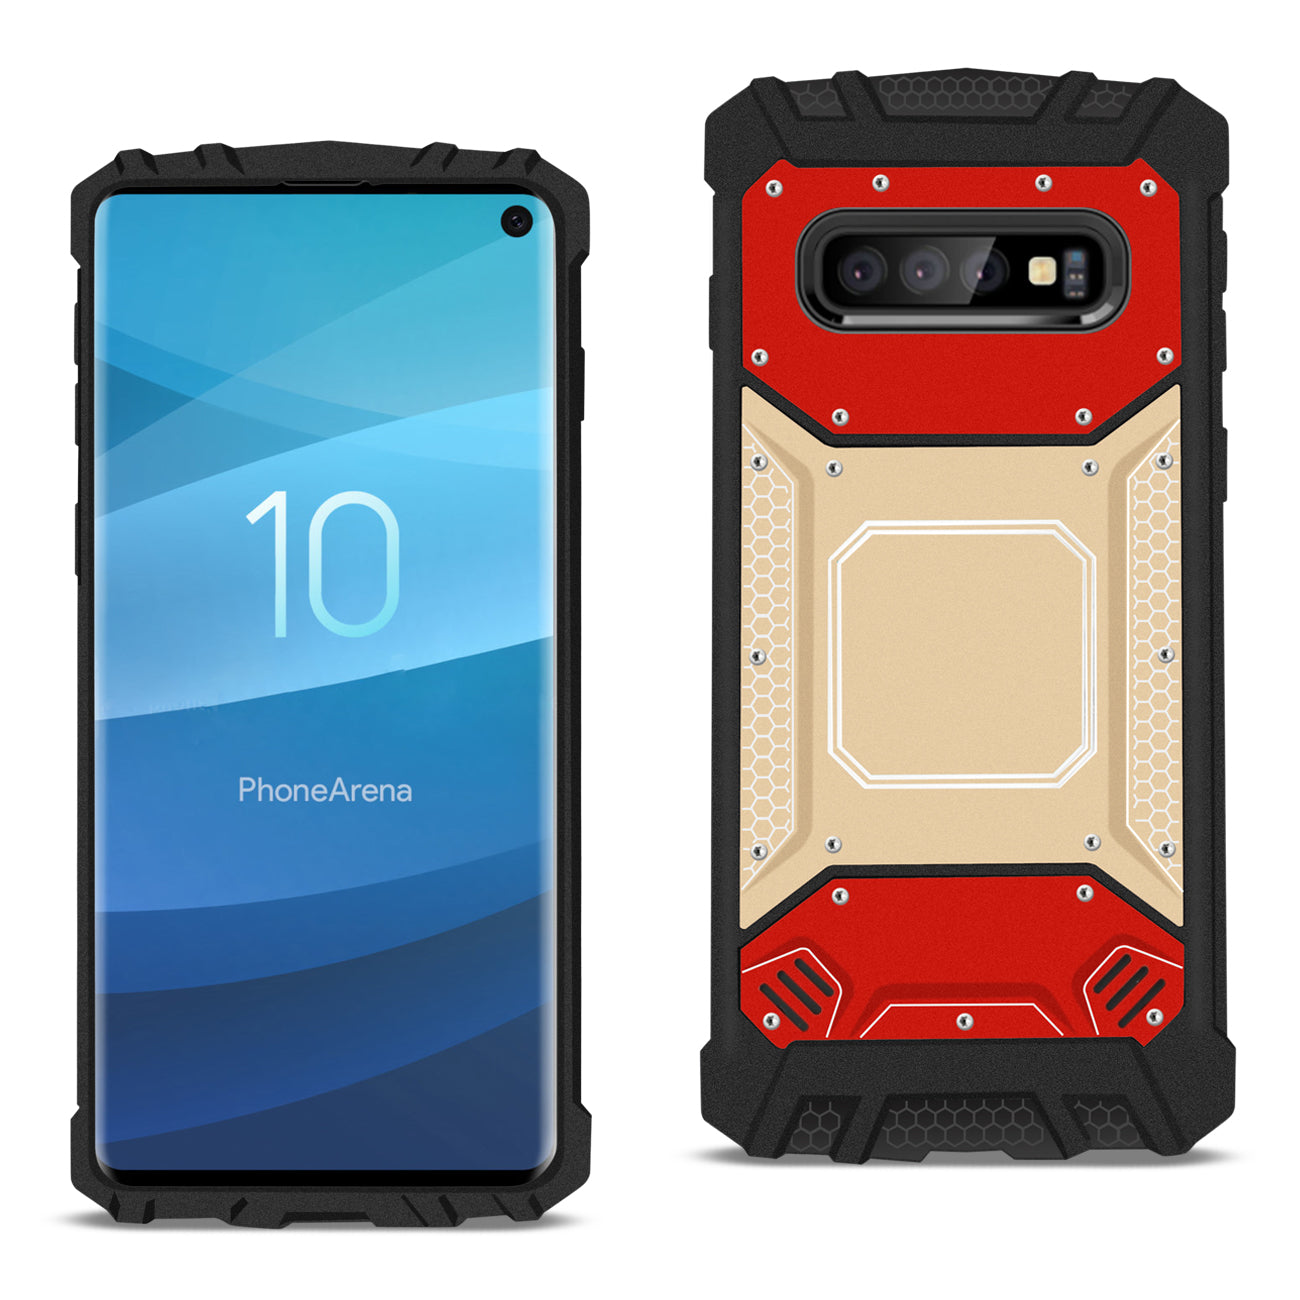 SAMSUNG GALAXY S10 Metallic Front Cover Case In Red and Gold